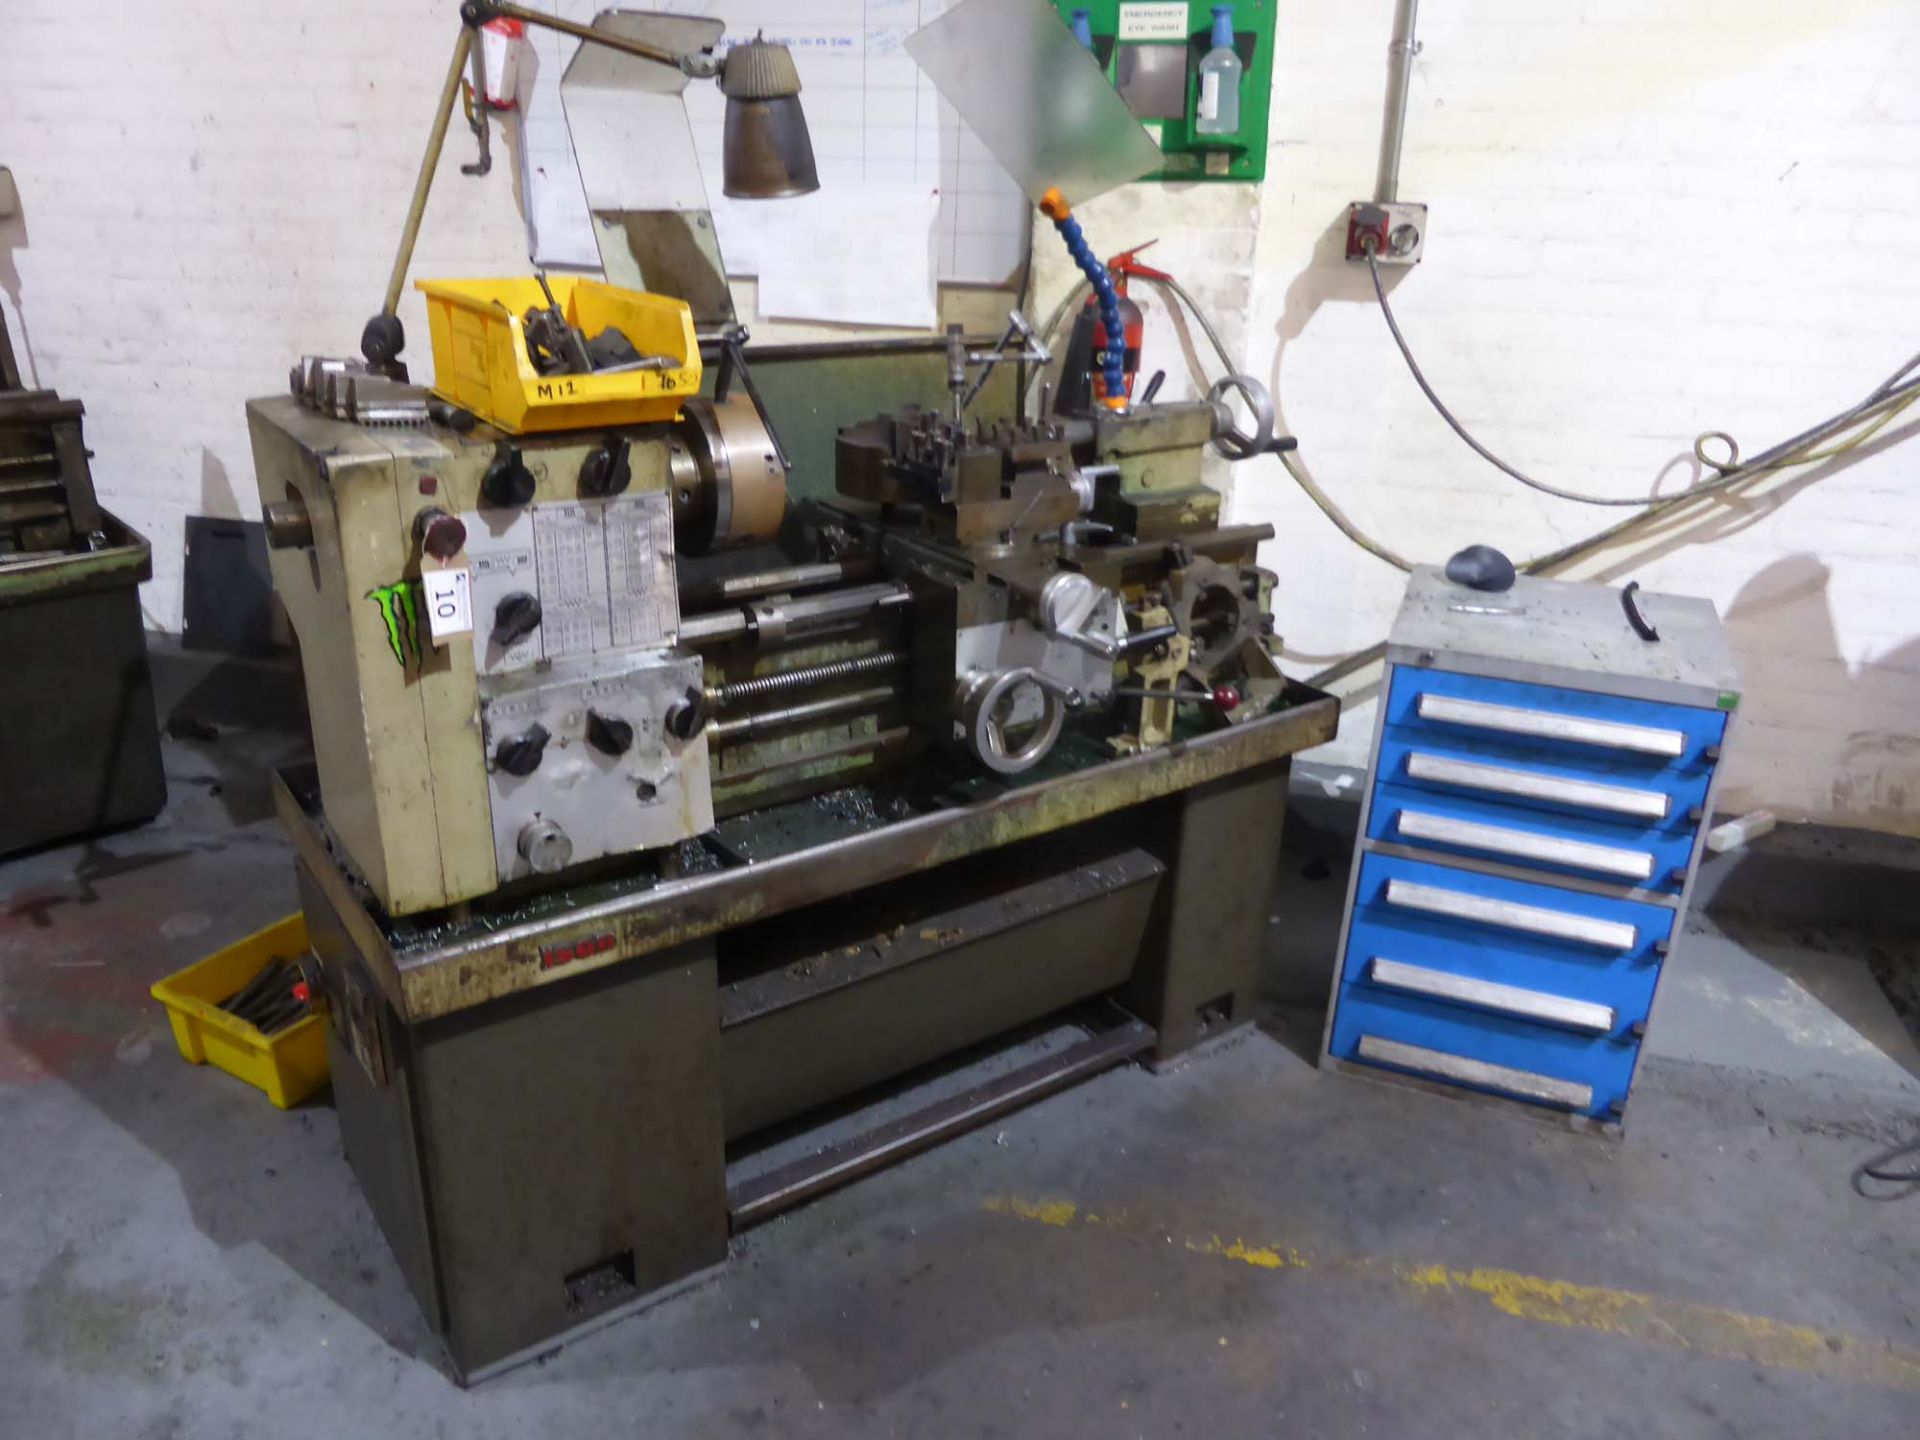 Harrison M300 30in x 9in centre lathe with QC tool post, 3 and 4 jaw chuck, steadies and other